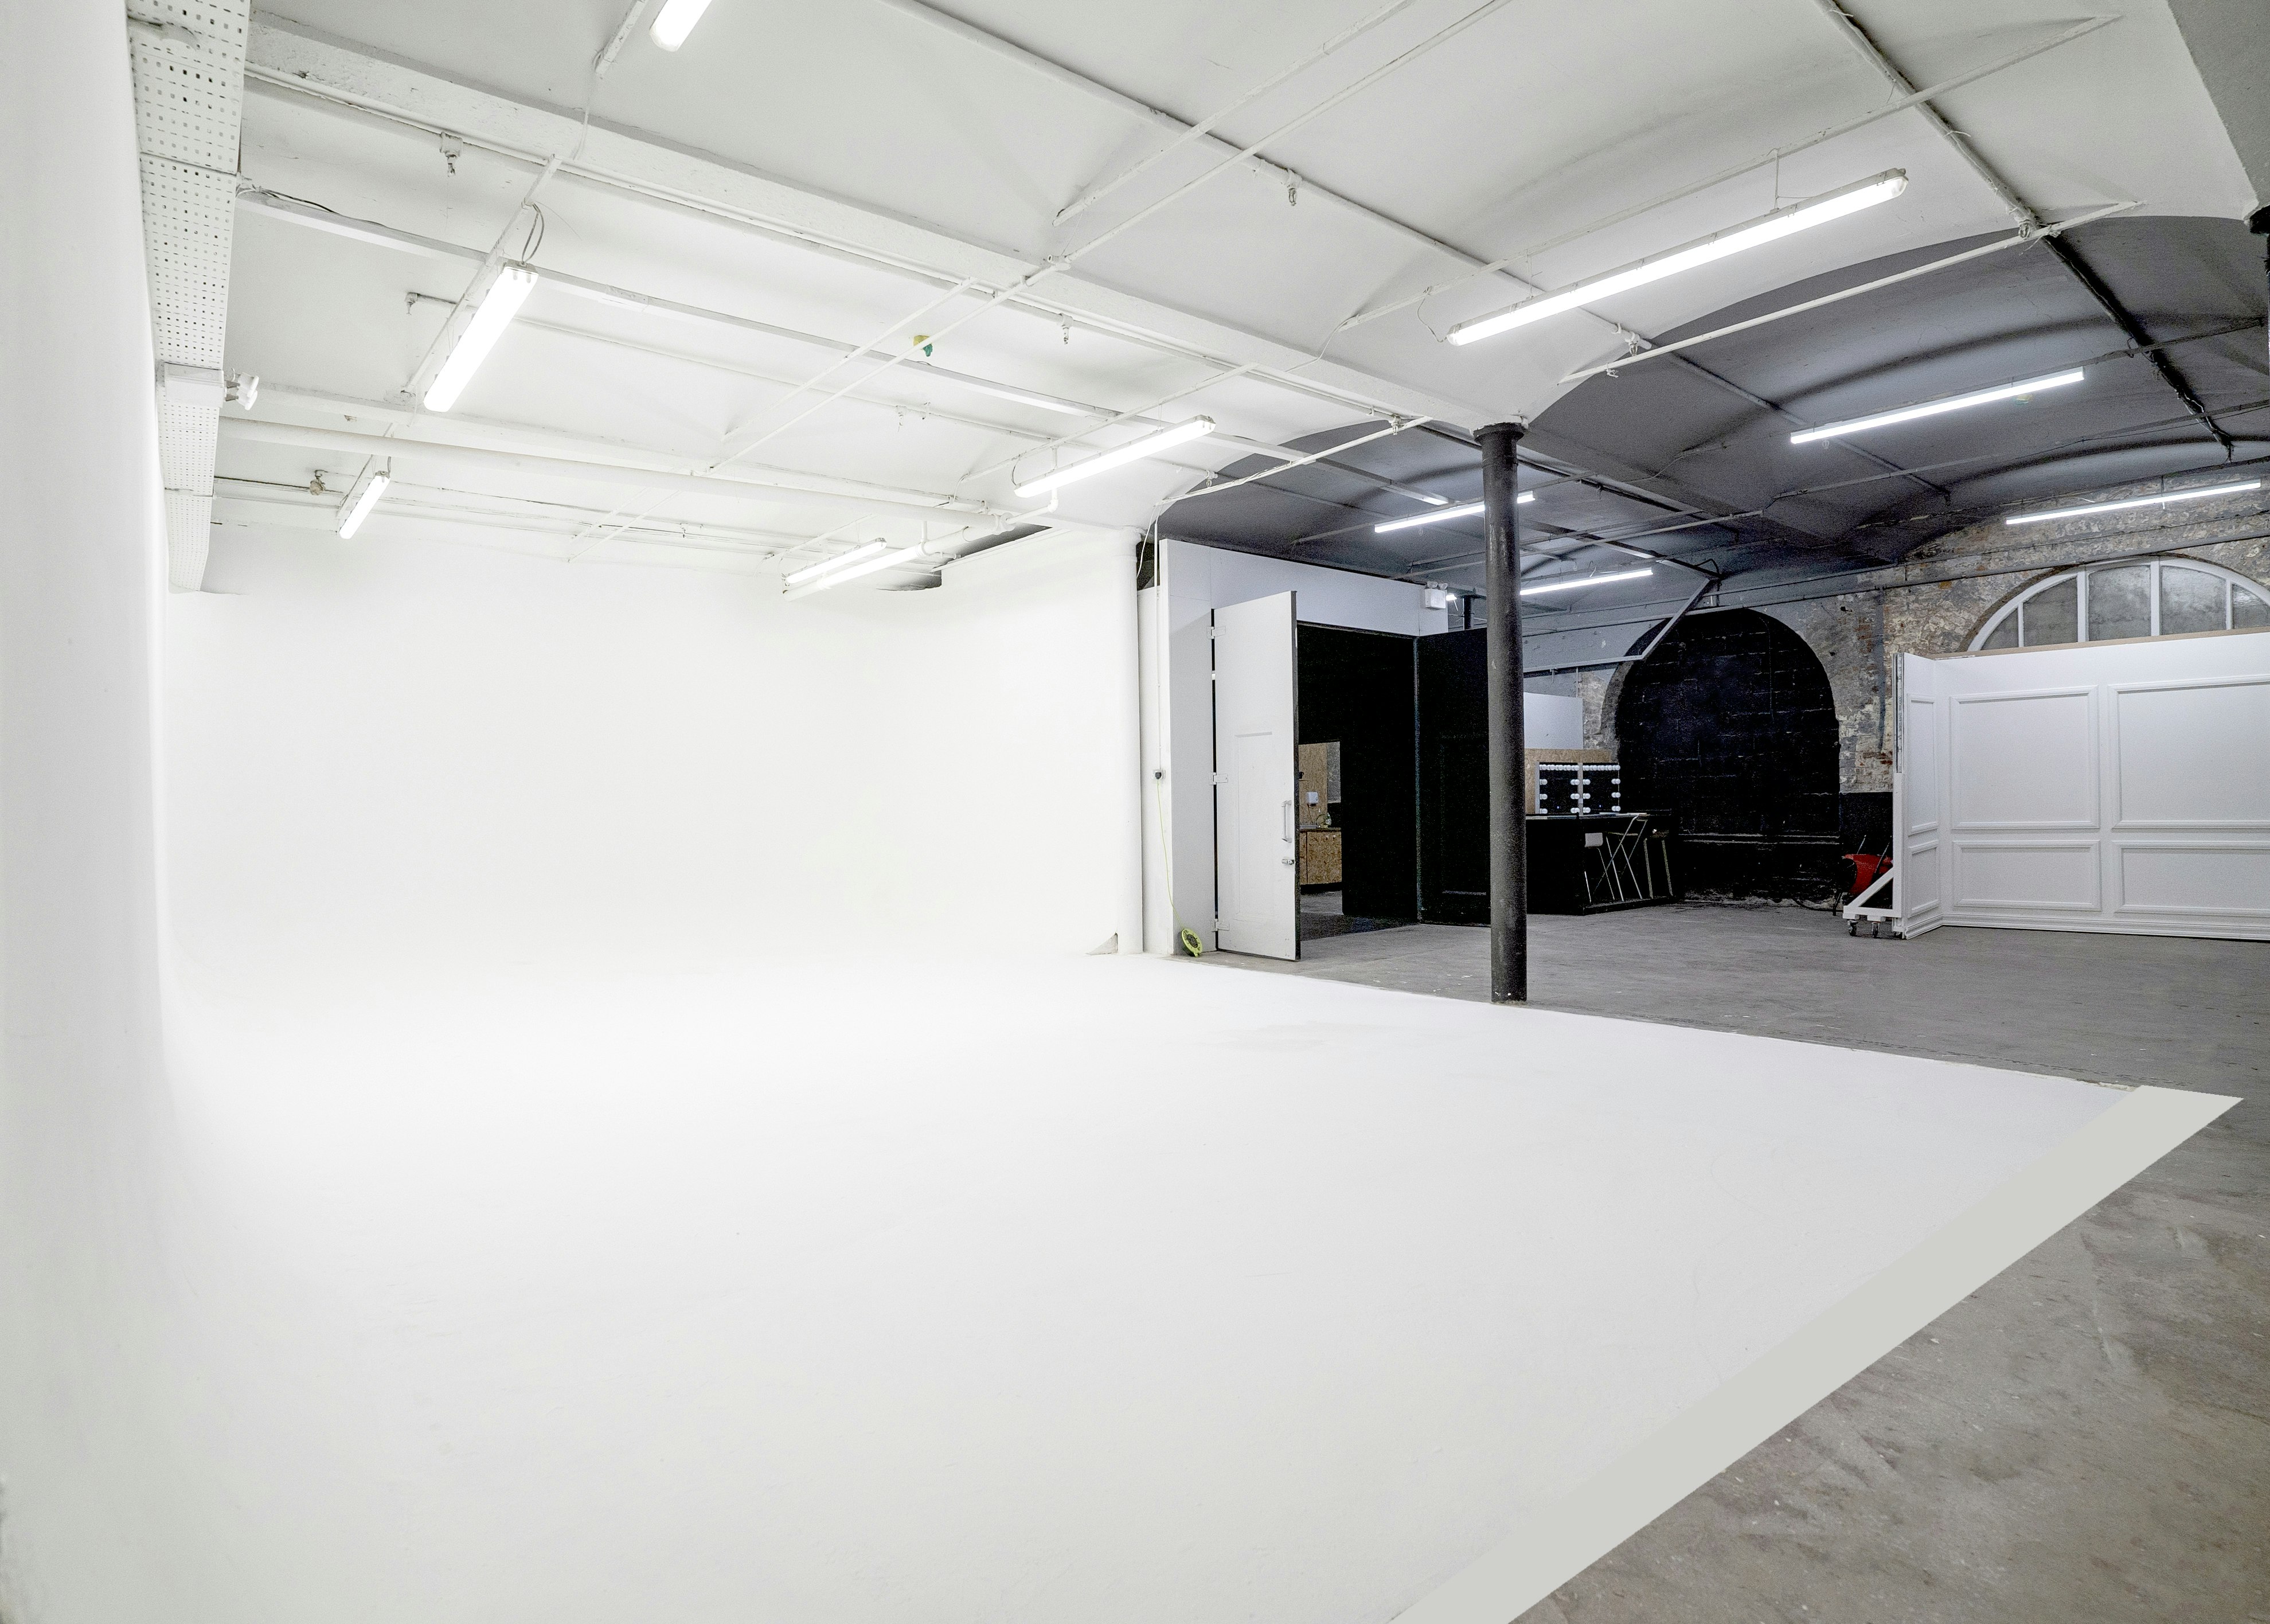 Filming Locations Venues in Manchester - Submerged Spaces